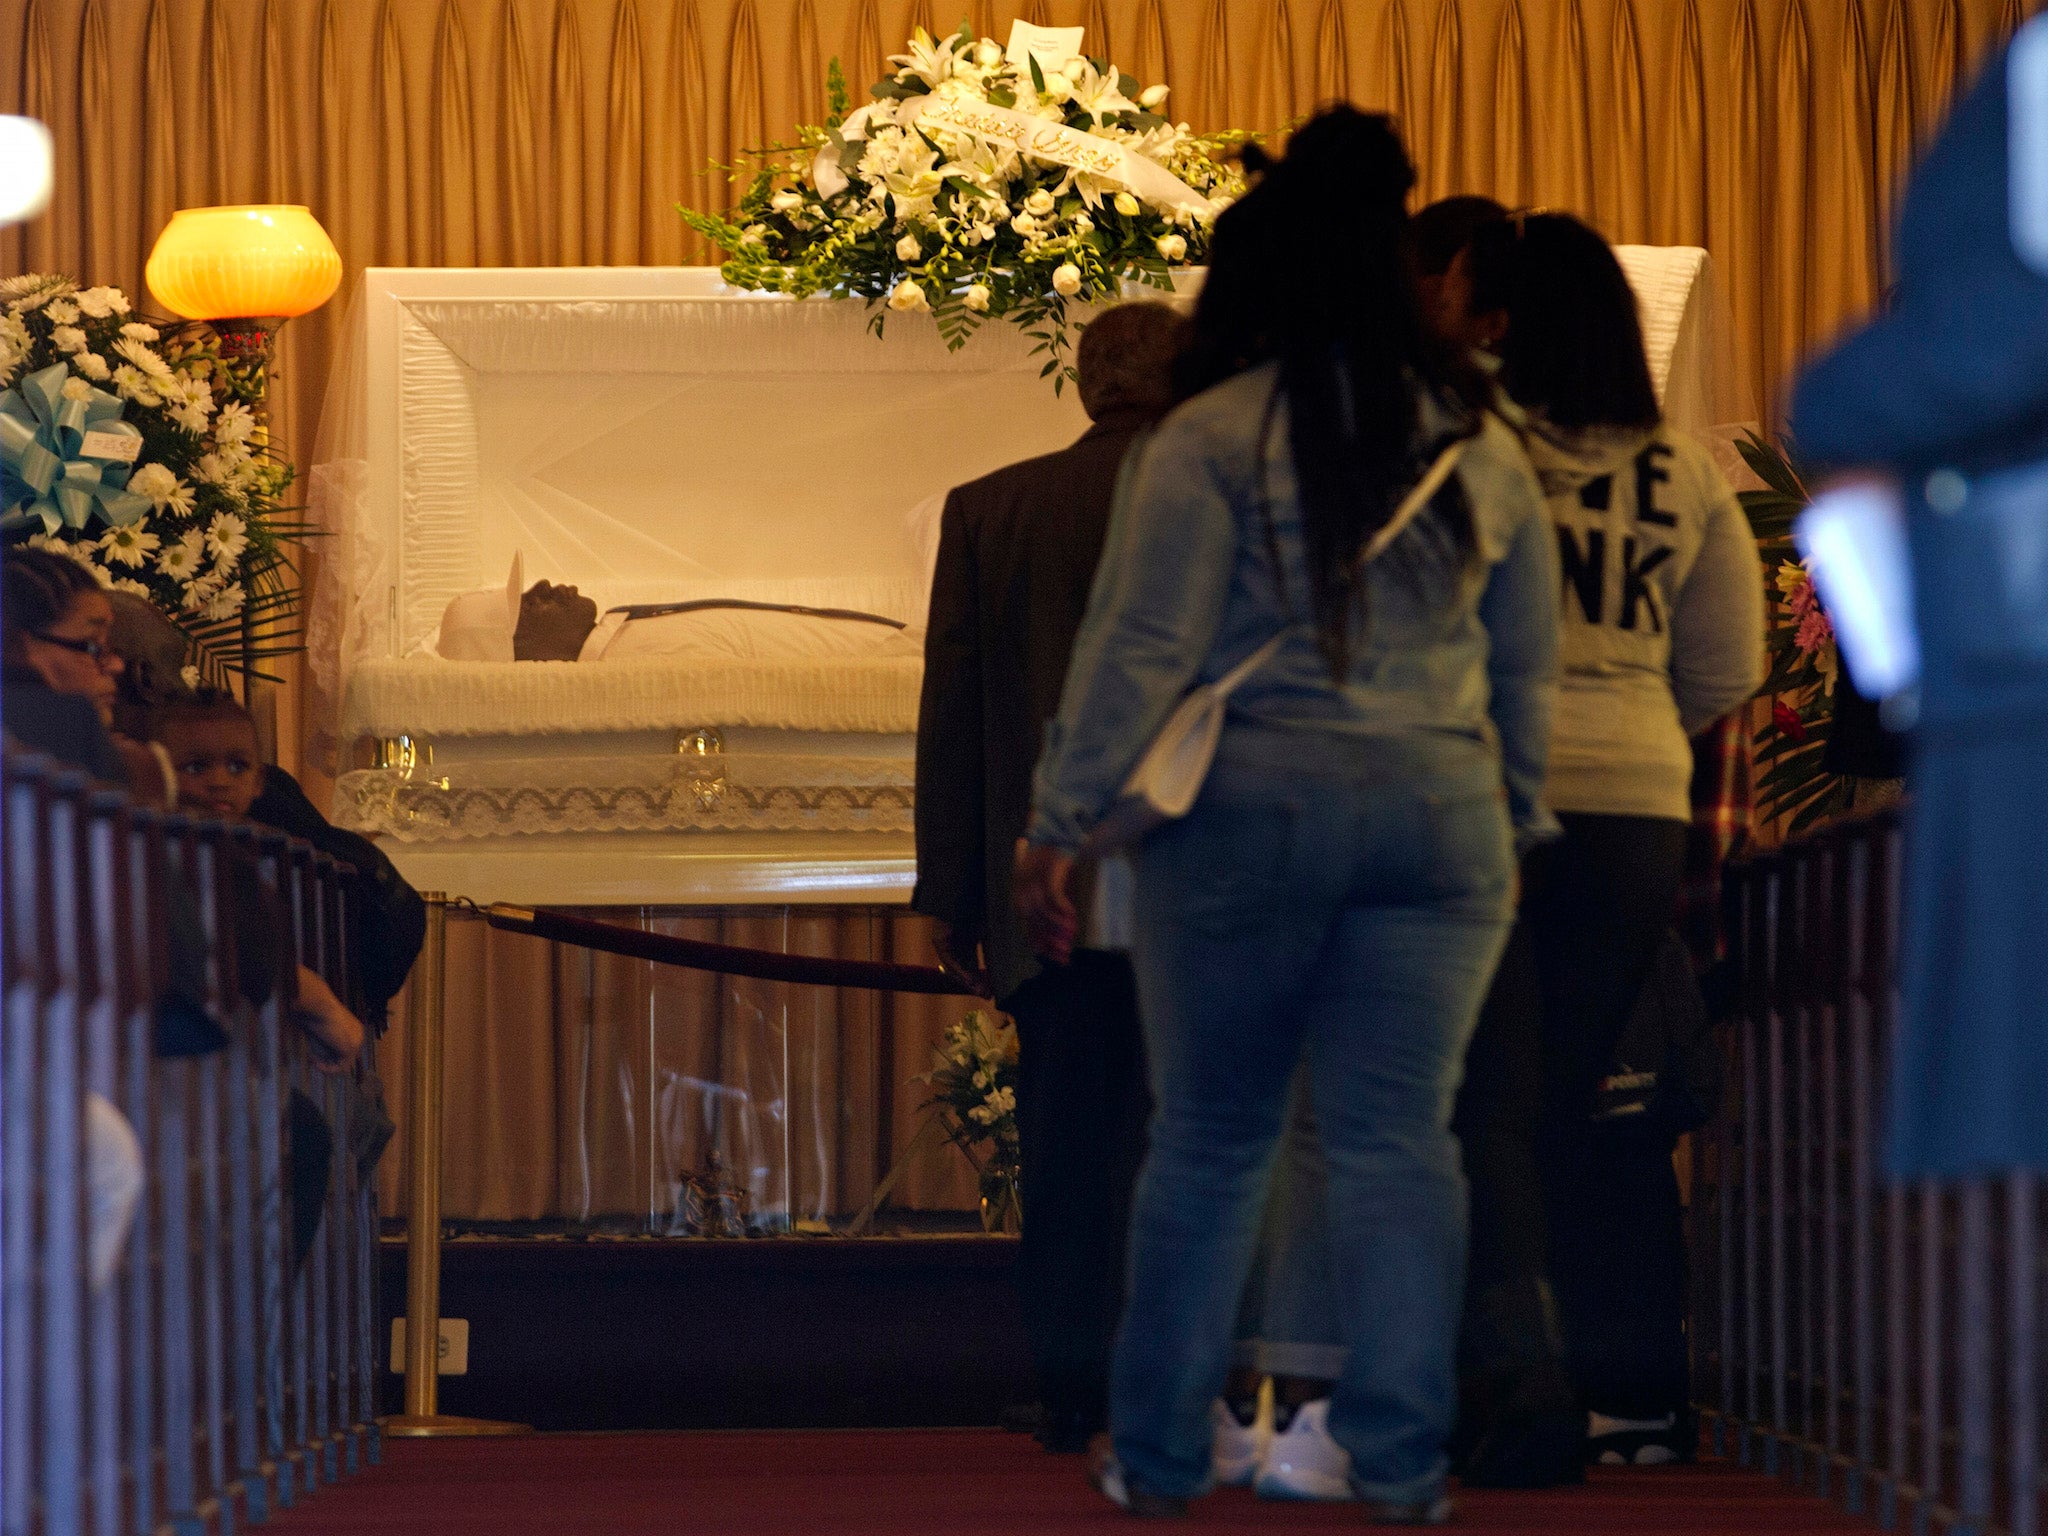 Freddie Gray's funeral's took place in Baltimore